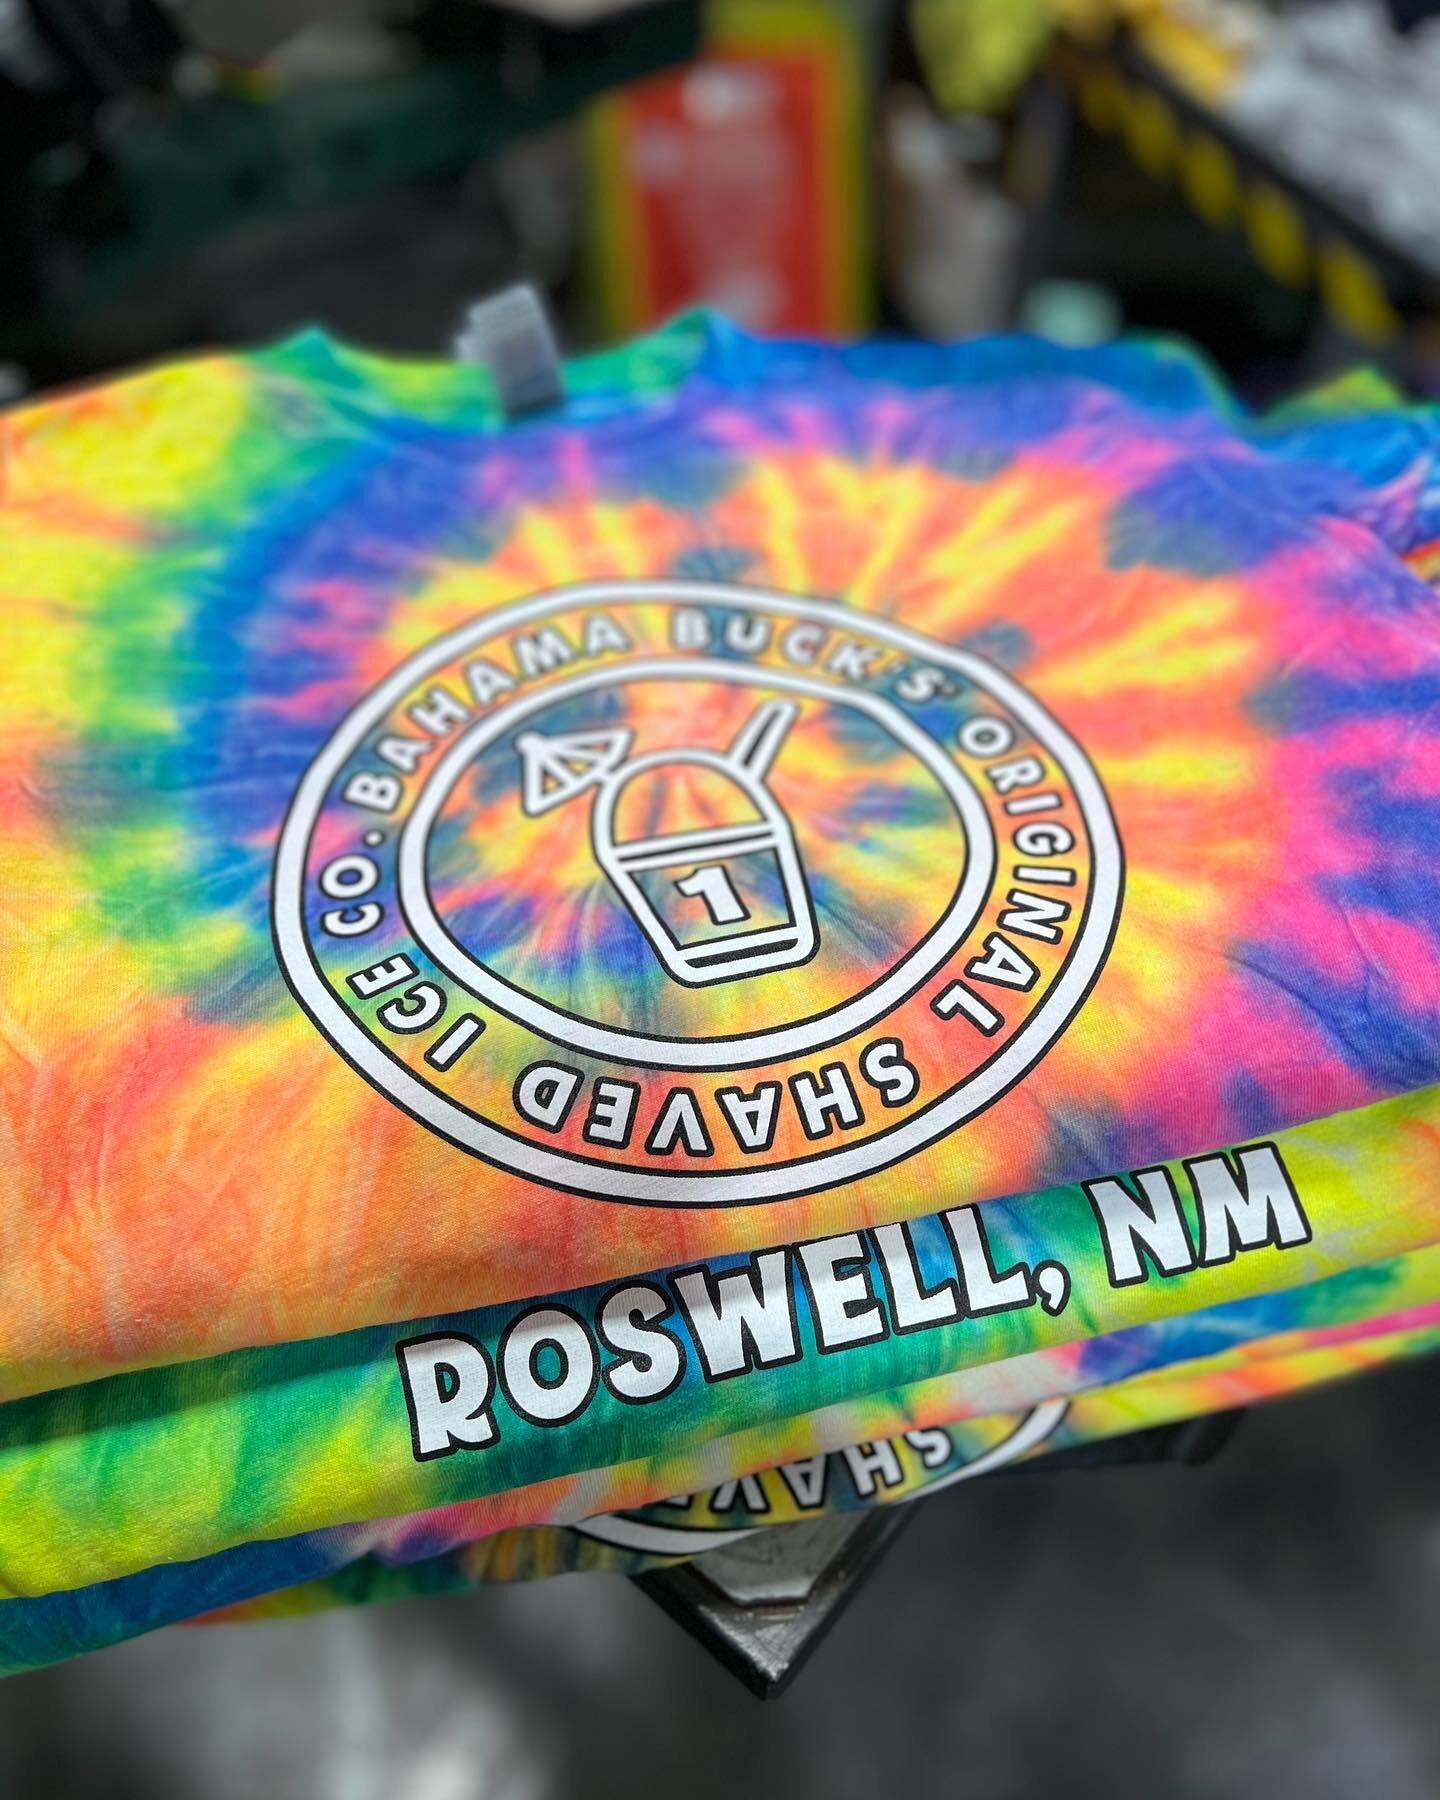 It&rsquo;s @bahamabucks.roswell 1 year anniversary weekend! Stop by for some some fun surprises today!!

#moonmanprinting #printedinroswell #screenprinted #customshirts #screenprintedshirts #tiedye #dyenomite #screenprintedtiedye #bahamabucks #shaved